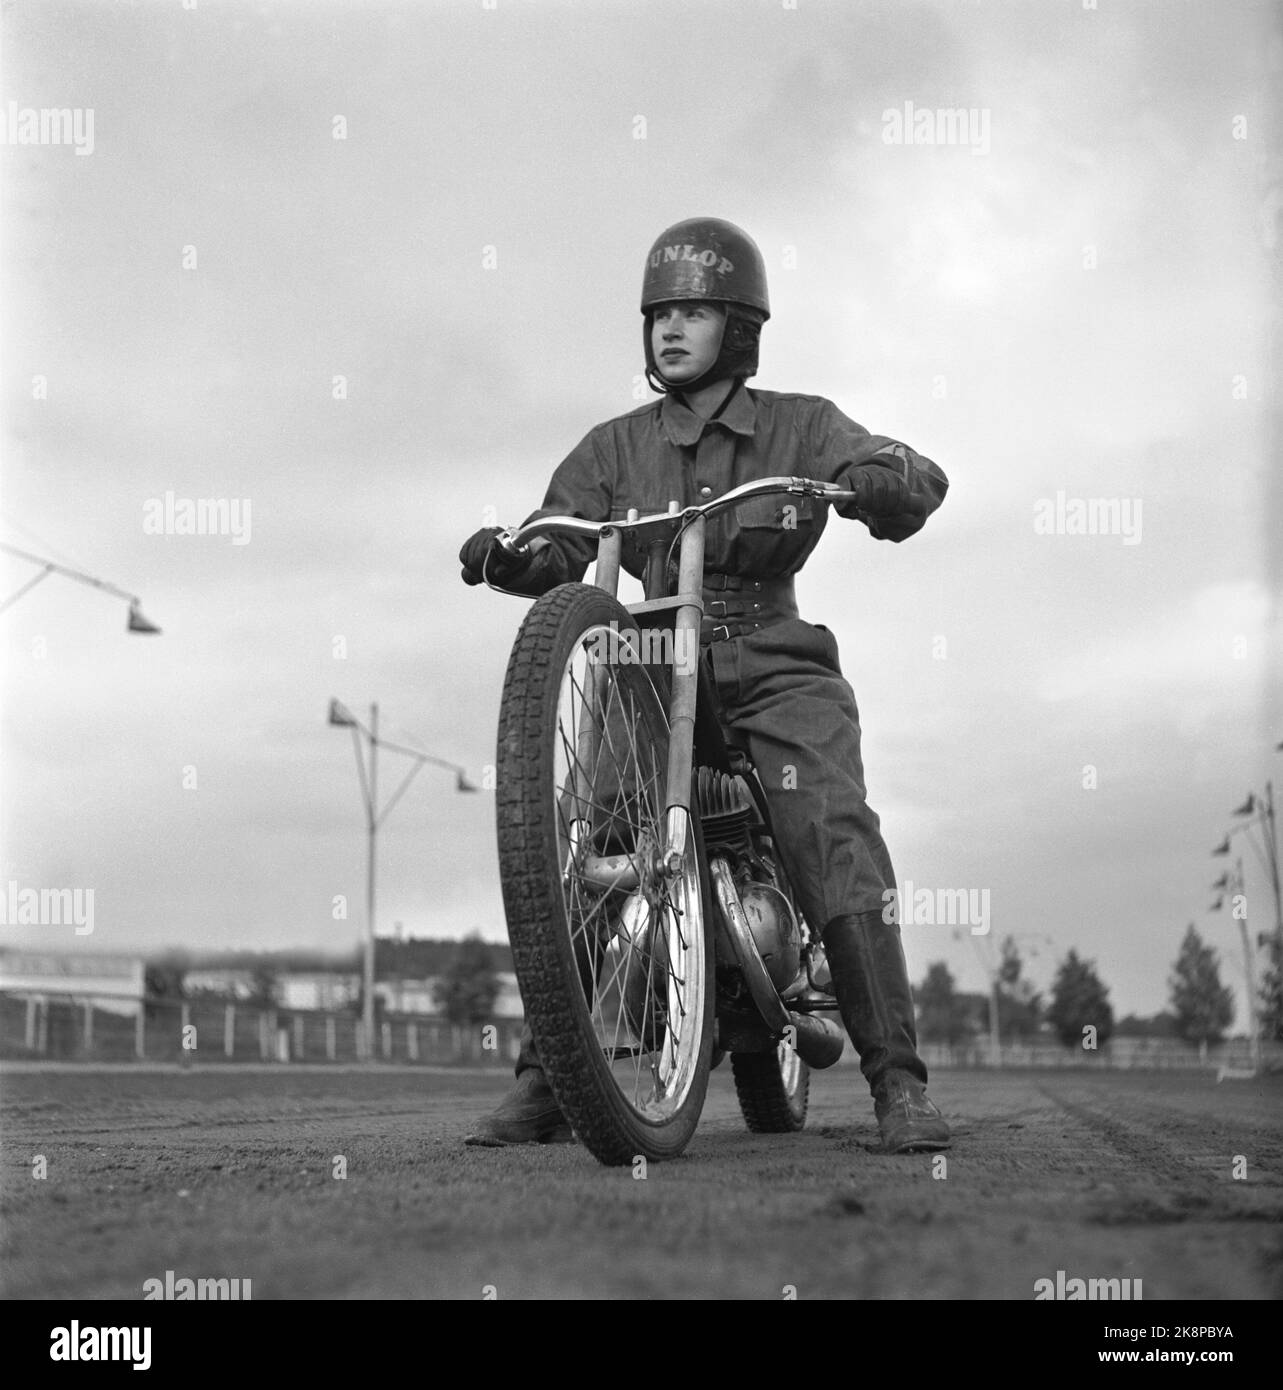 Oslo 1954 - Edna Falao is Europe's only female speedway runner. Here she sits on her motorcycle. Photo: Aage Storløkken / Current / NTB Stock Photo